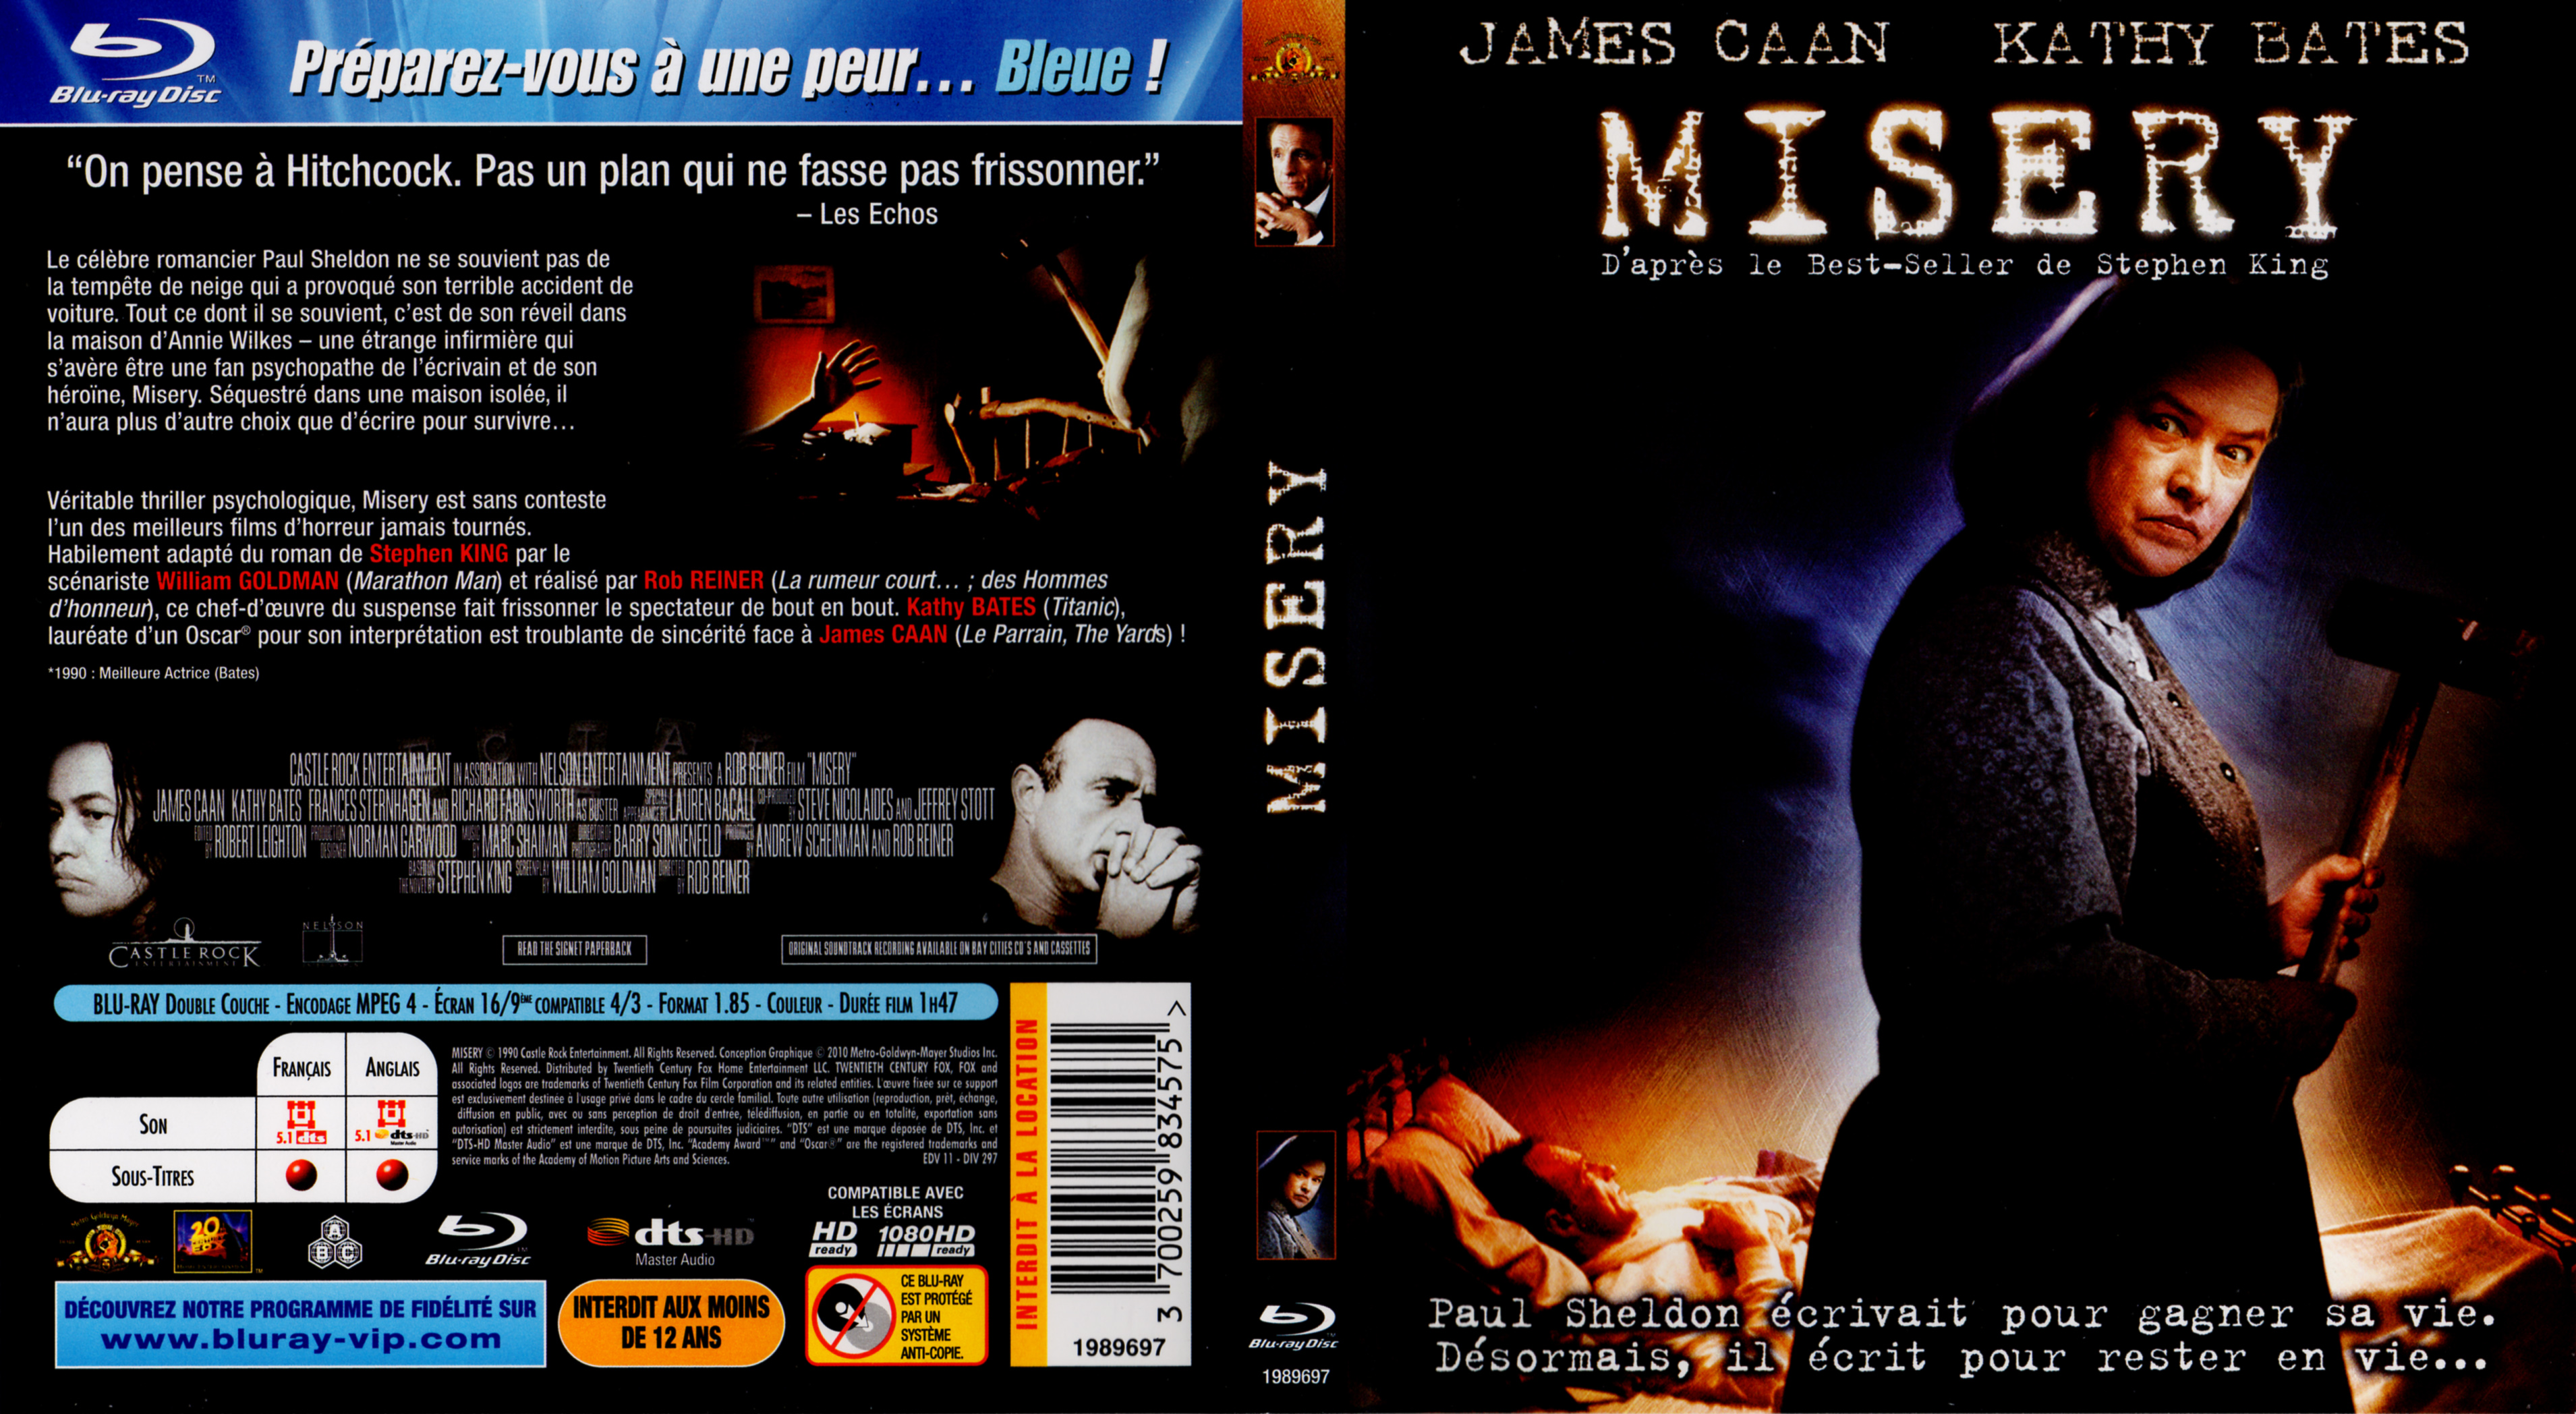 Jaquette DVD Misery (BLU-RAY) v2